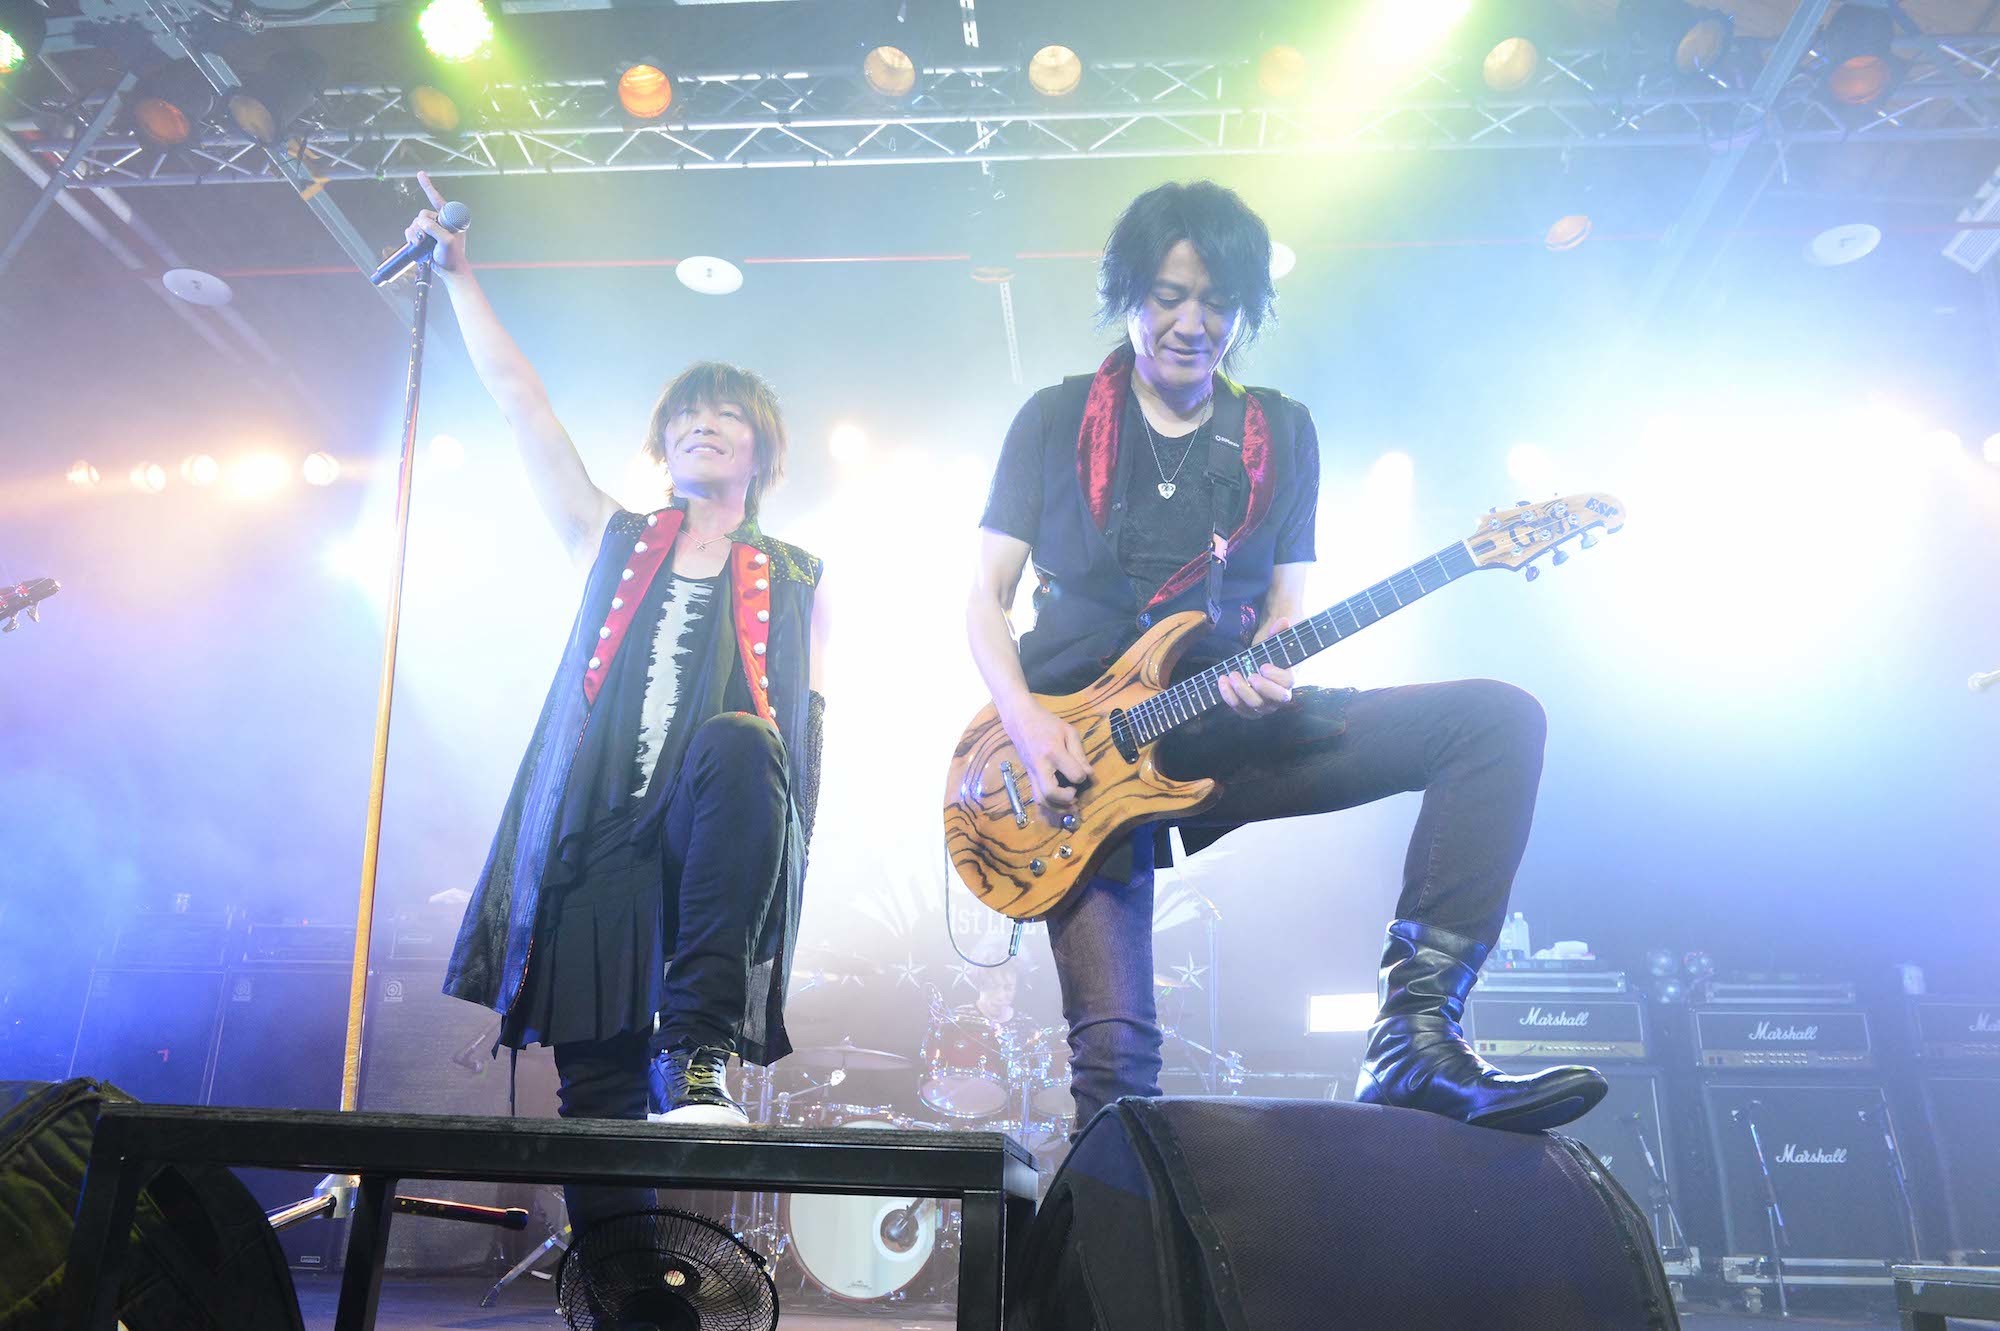 FLOW×GRANRODEO 1st LIVE TOUR ”Howling” in Taiwan